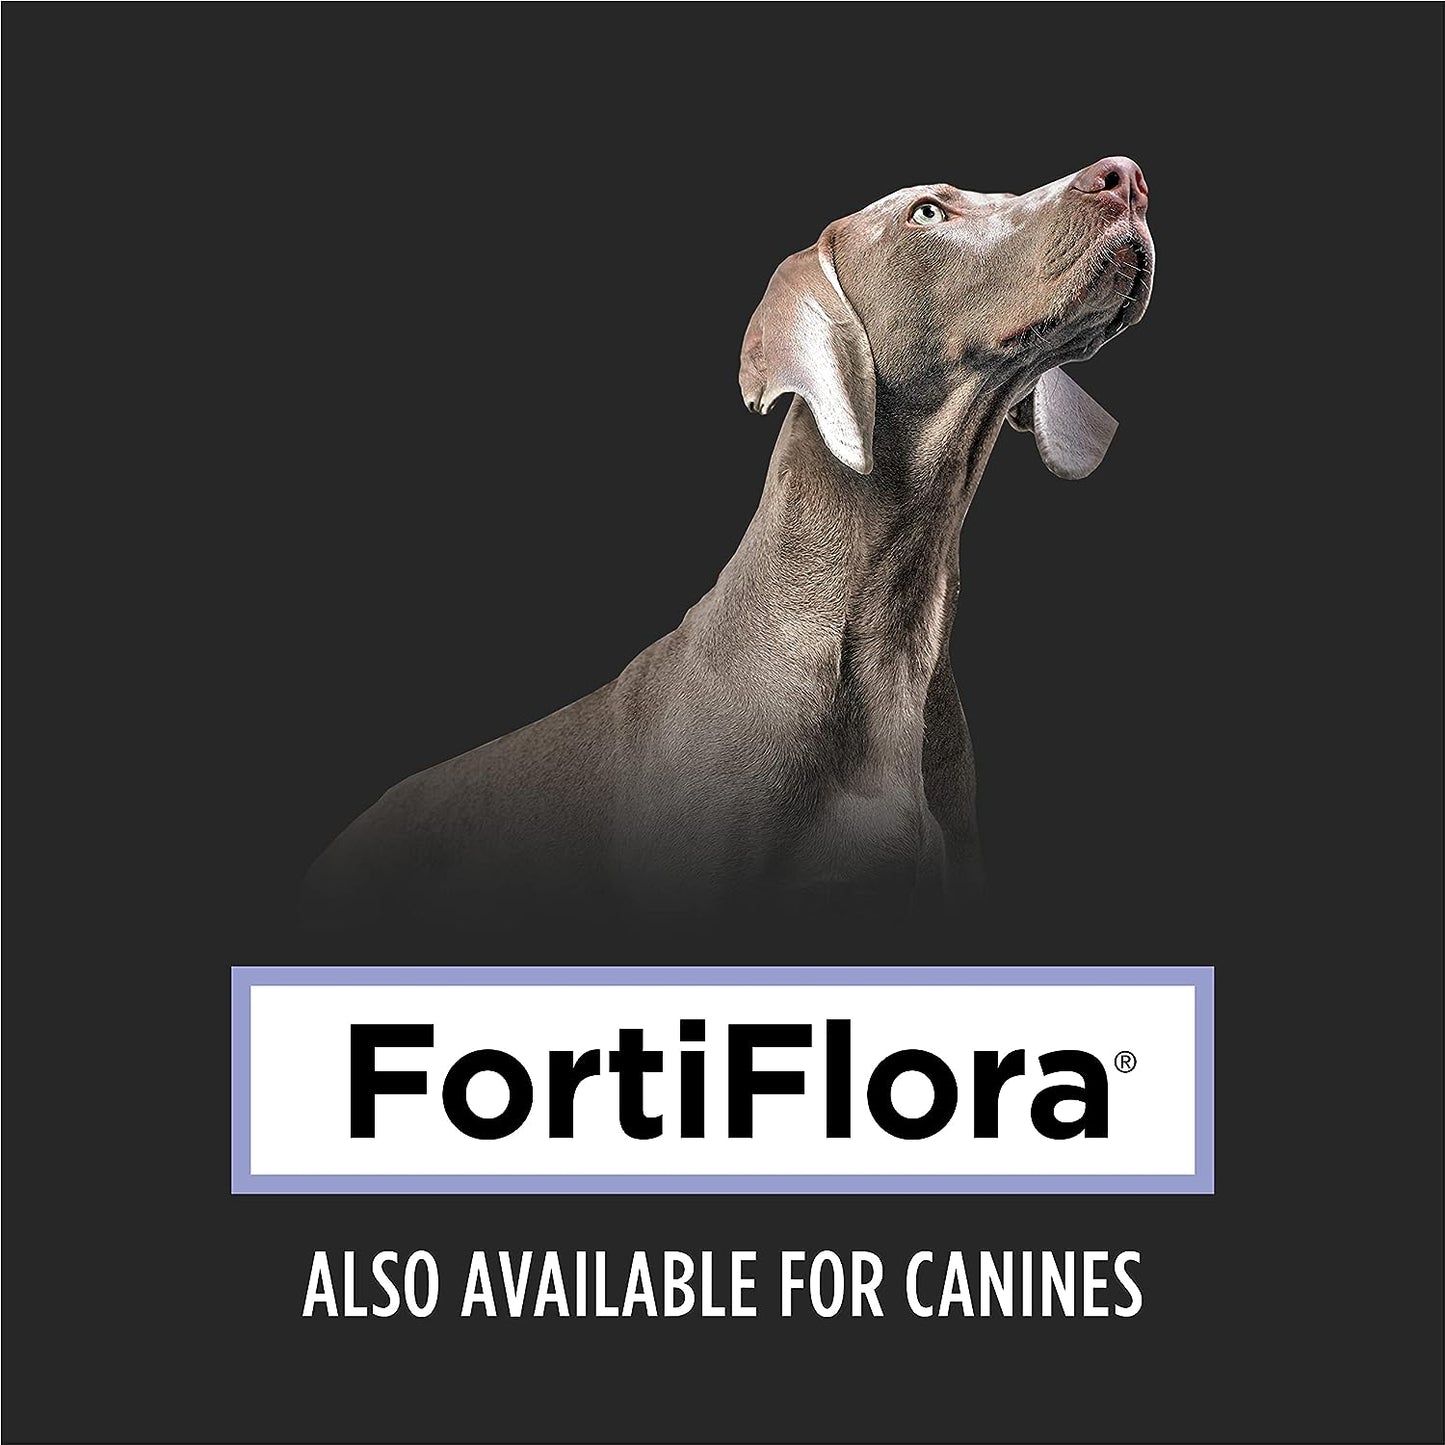 PRO PLAN VETERINARY SUPPLEMENTS® SUPPLEMENTS FortiFlora® Powdered Probiotic Supplement for Cats